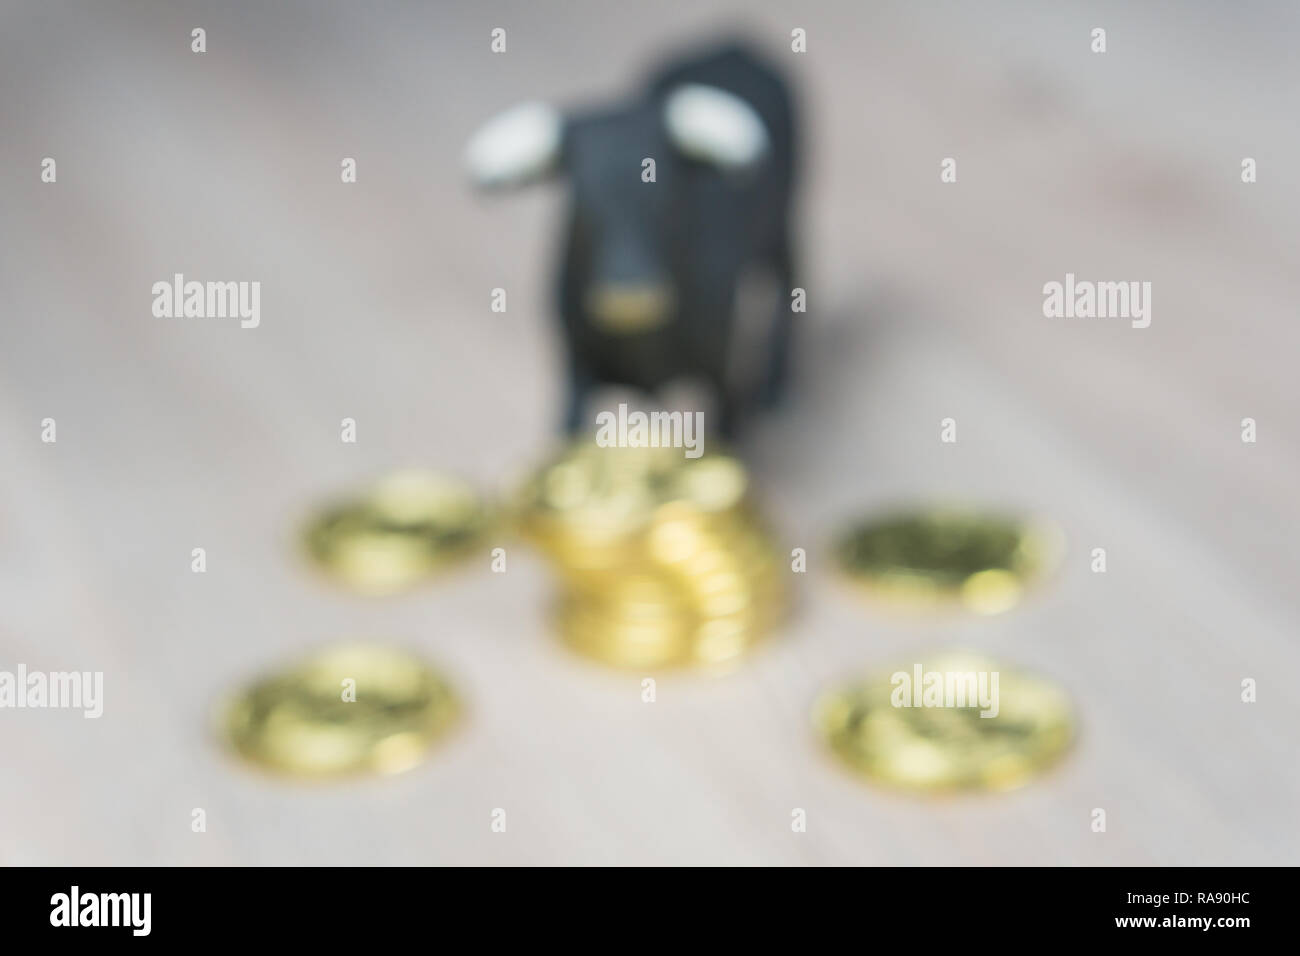 Bull market in crypto currency. Bull next to stack of bitcoin coins in blur Stock Photo